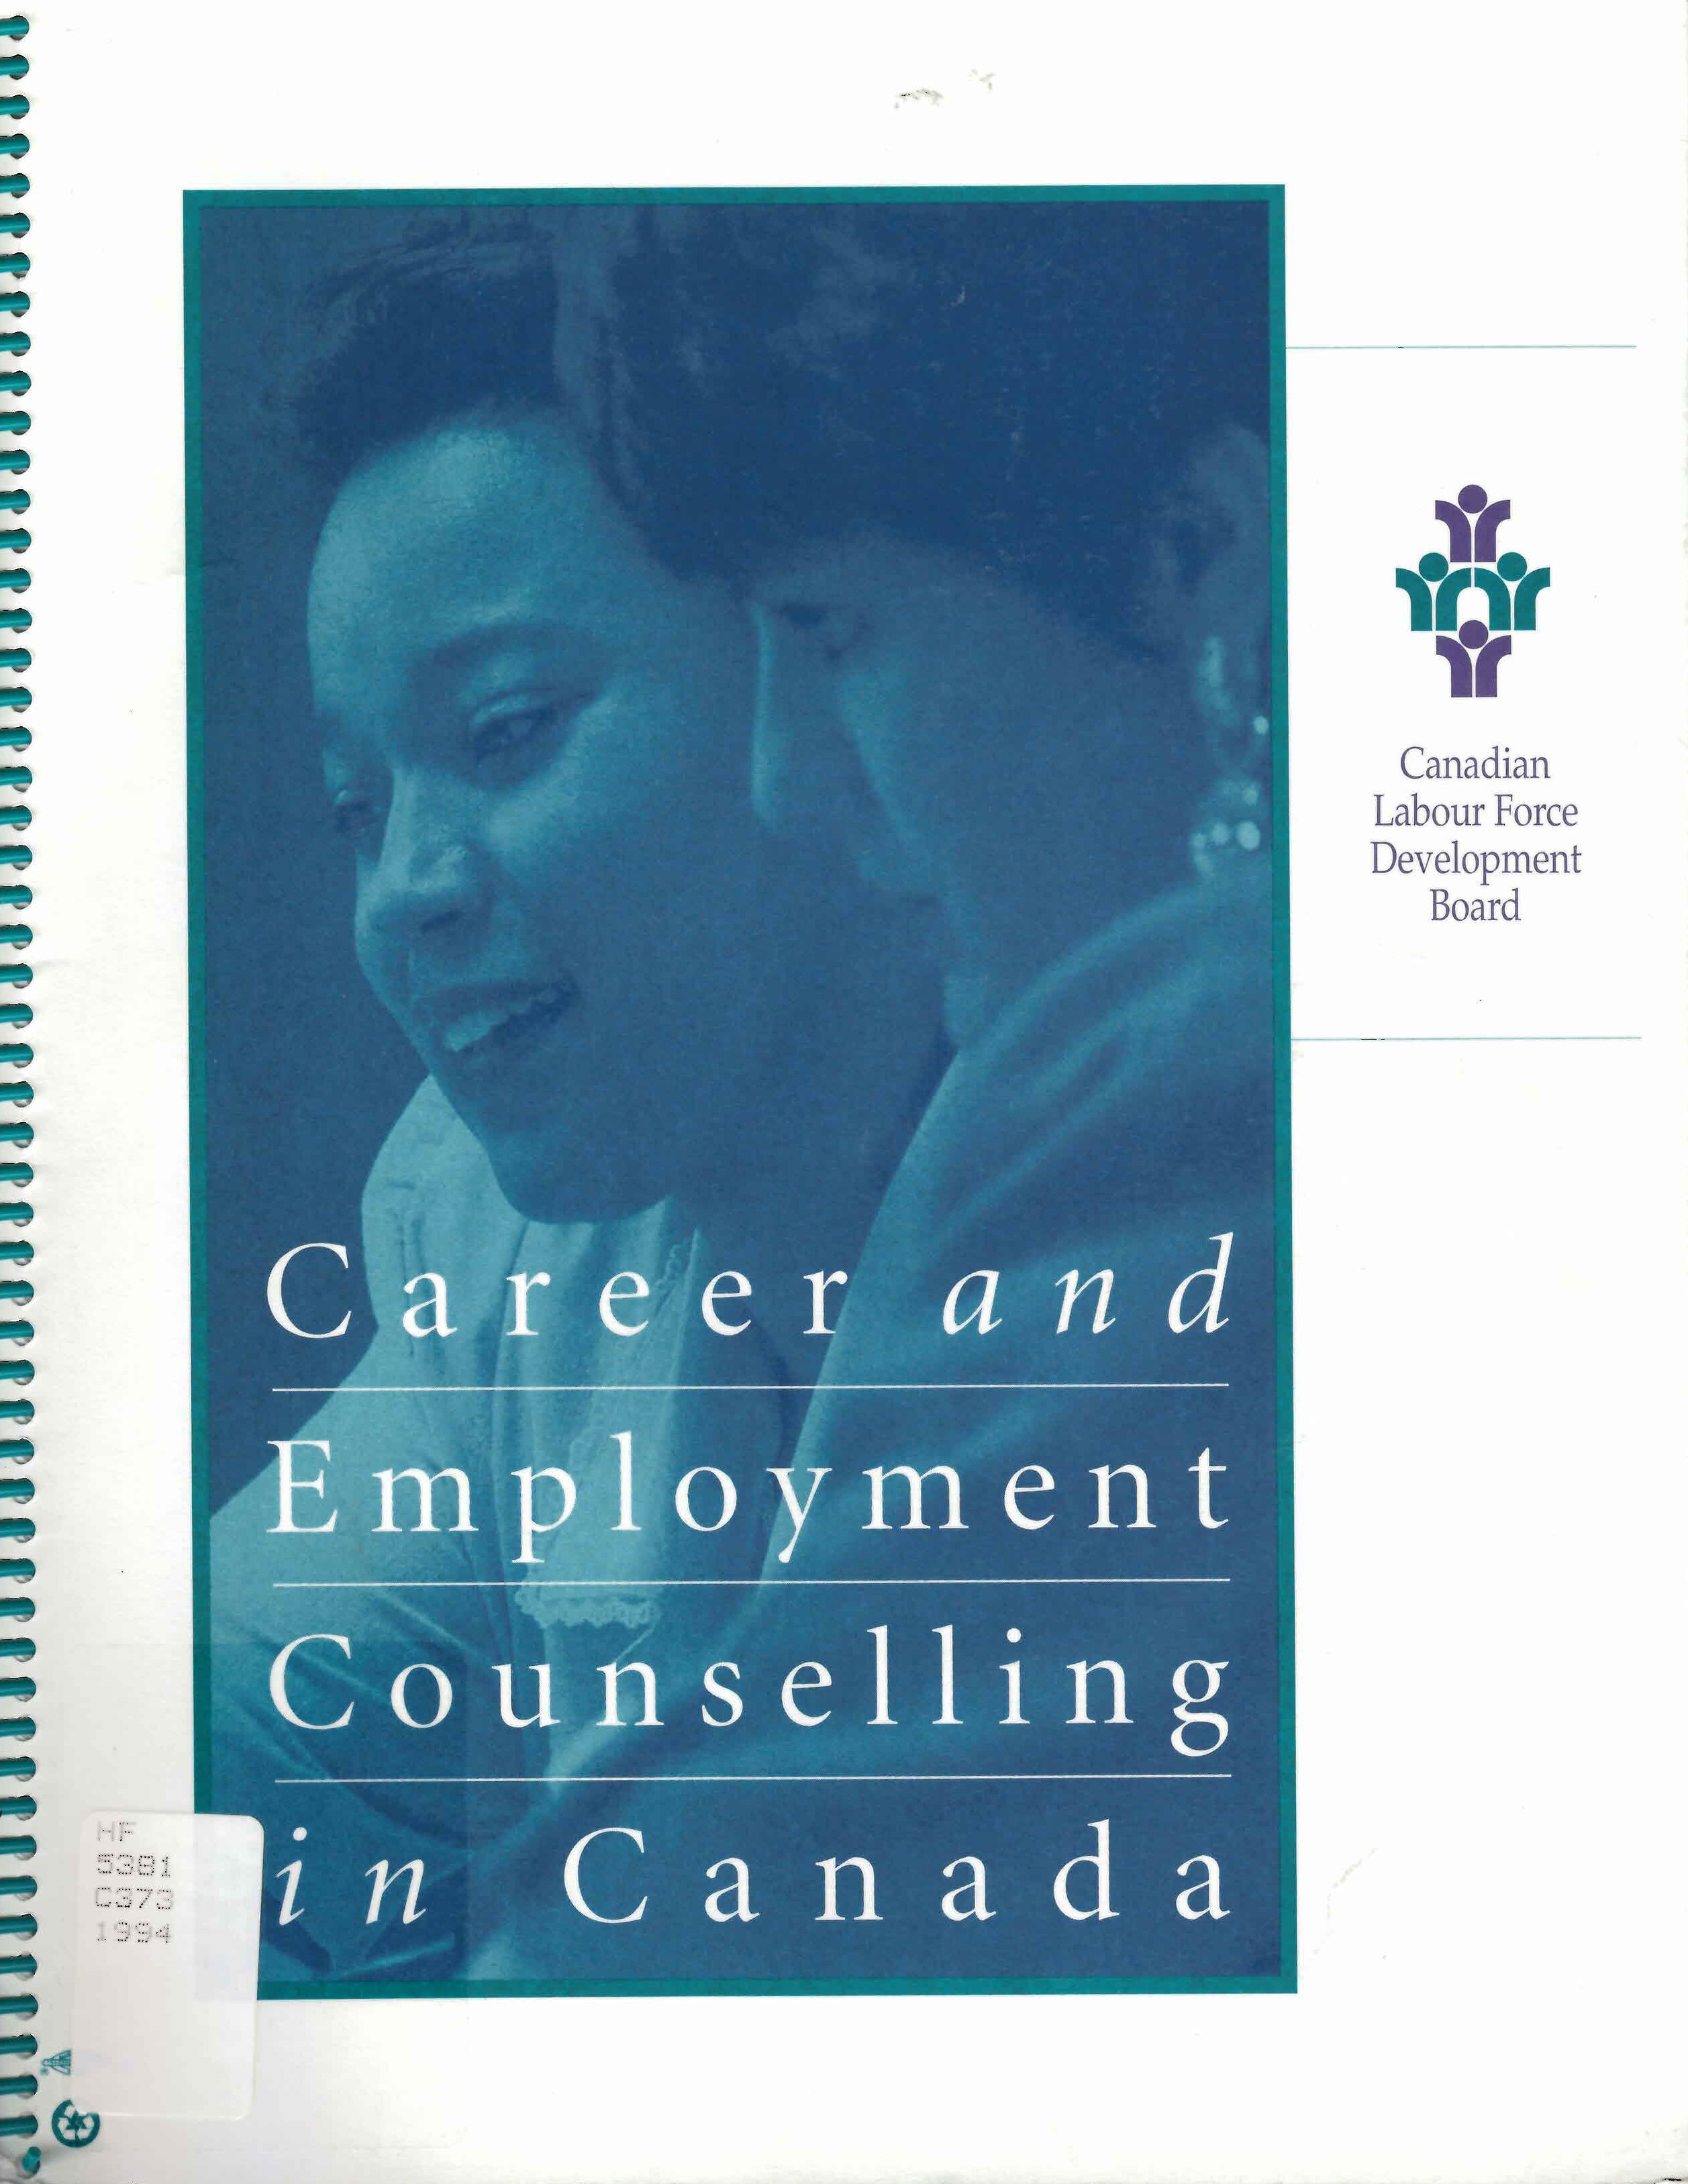 Career and employment counselling in Canada